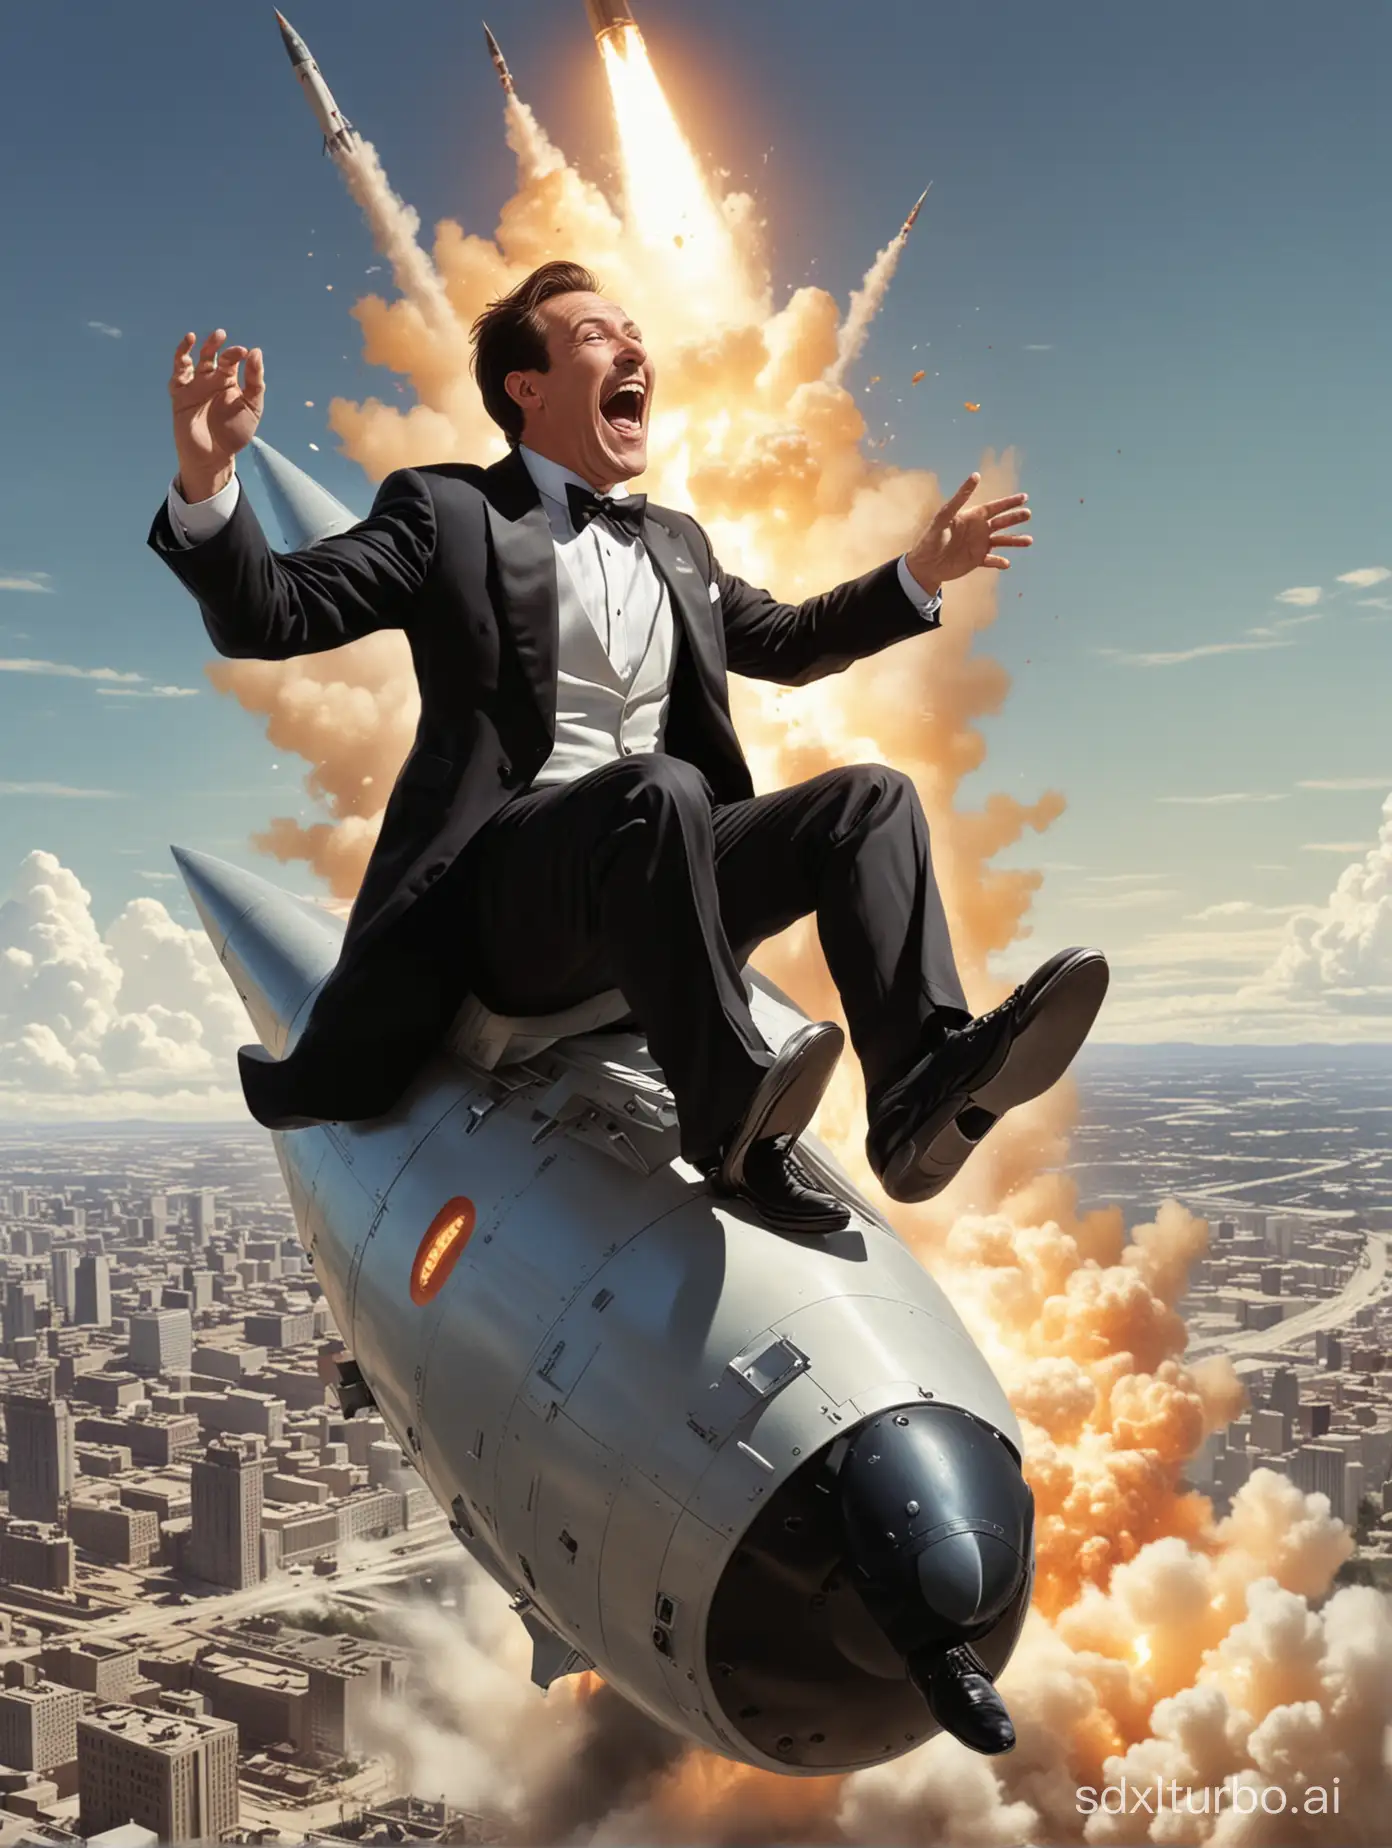 Laughing-Man-in-Tuxedo-Rides-Nuclear-Missile-Toward-City